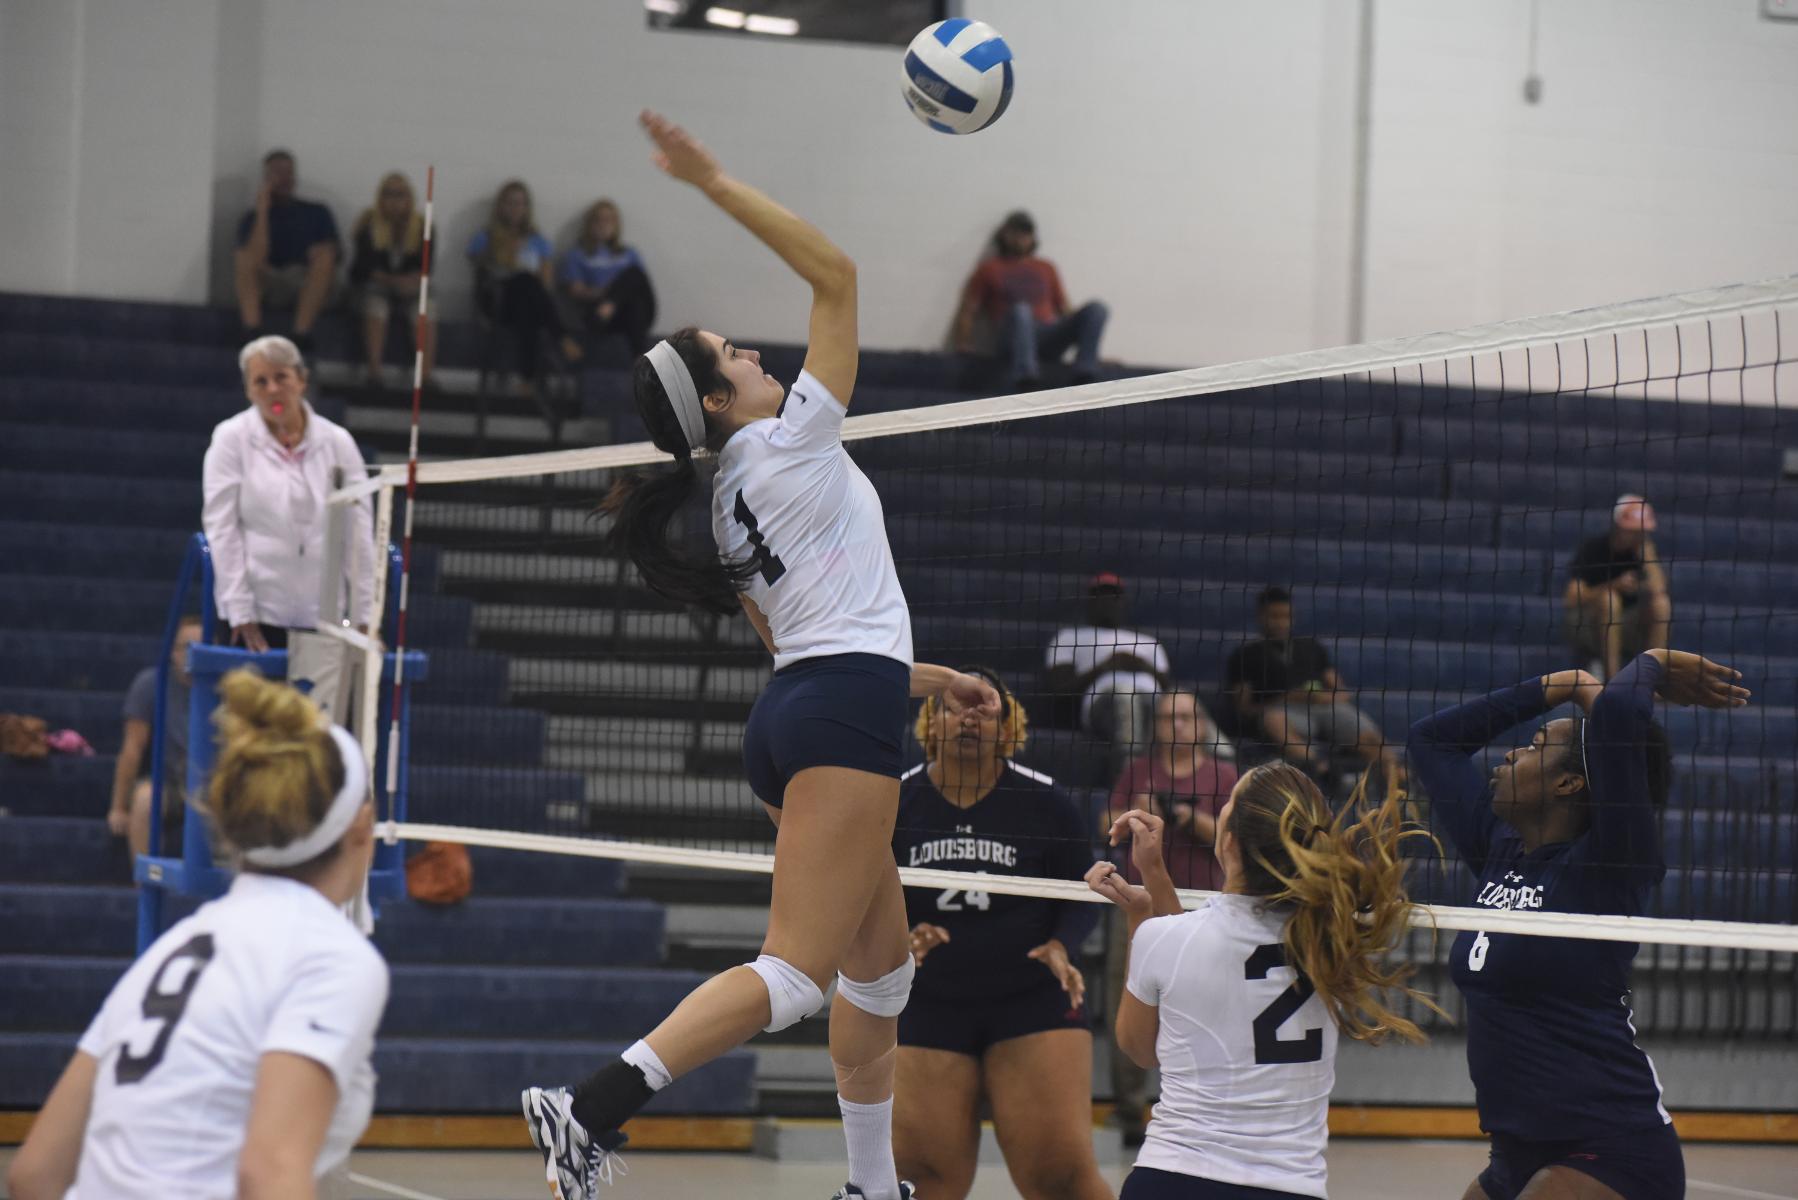 Cape Fear Women's Volleyball Team Wins 8th Straight Match